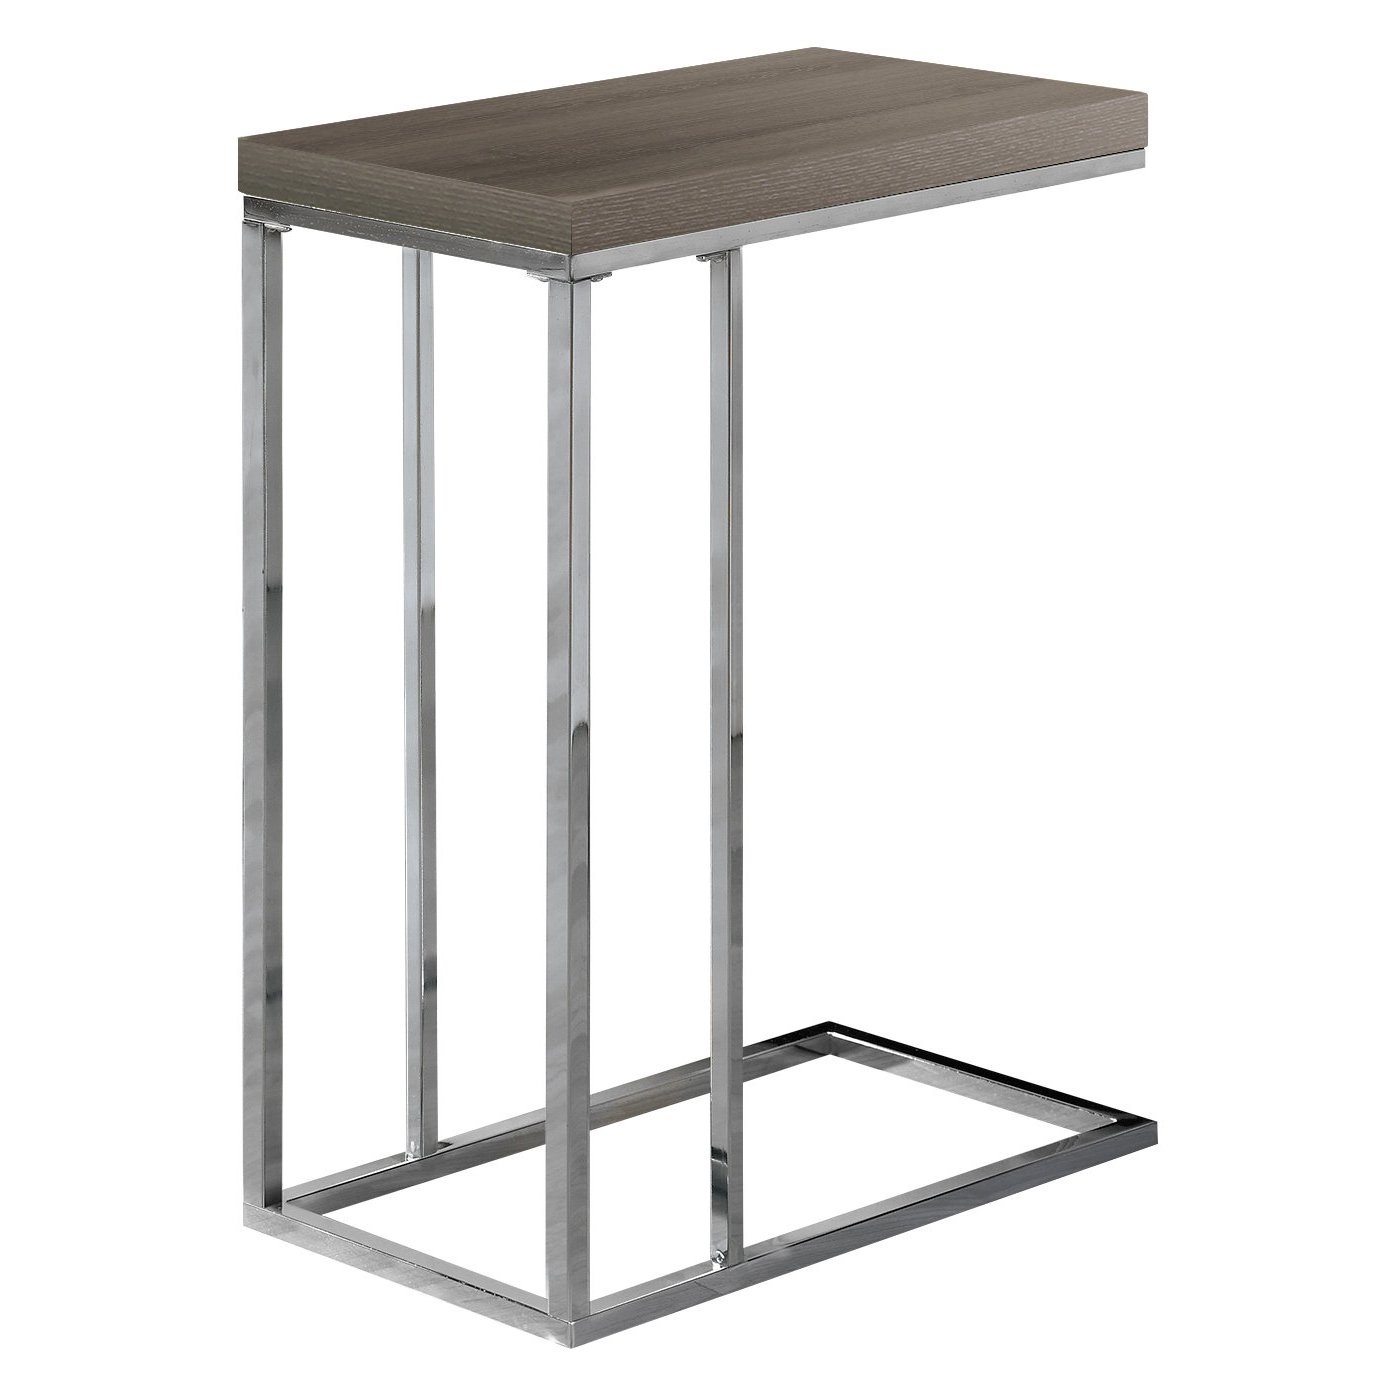 monarch specialties accent table chrome metal grey dark taupe kitchen dining home elegance furniture counter height with bench polished concrete coffee floor threshold transitions